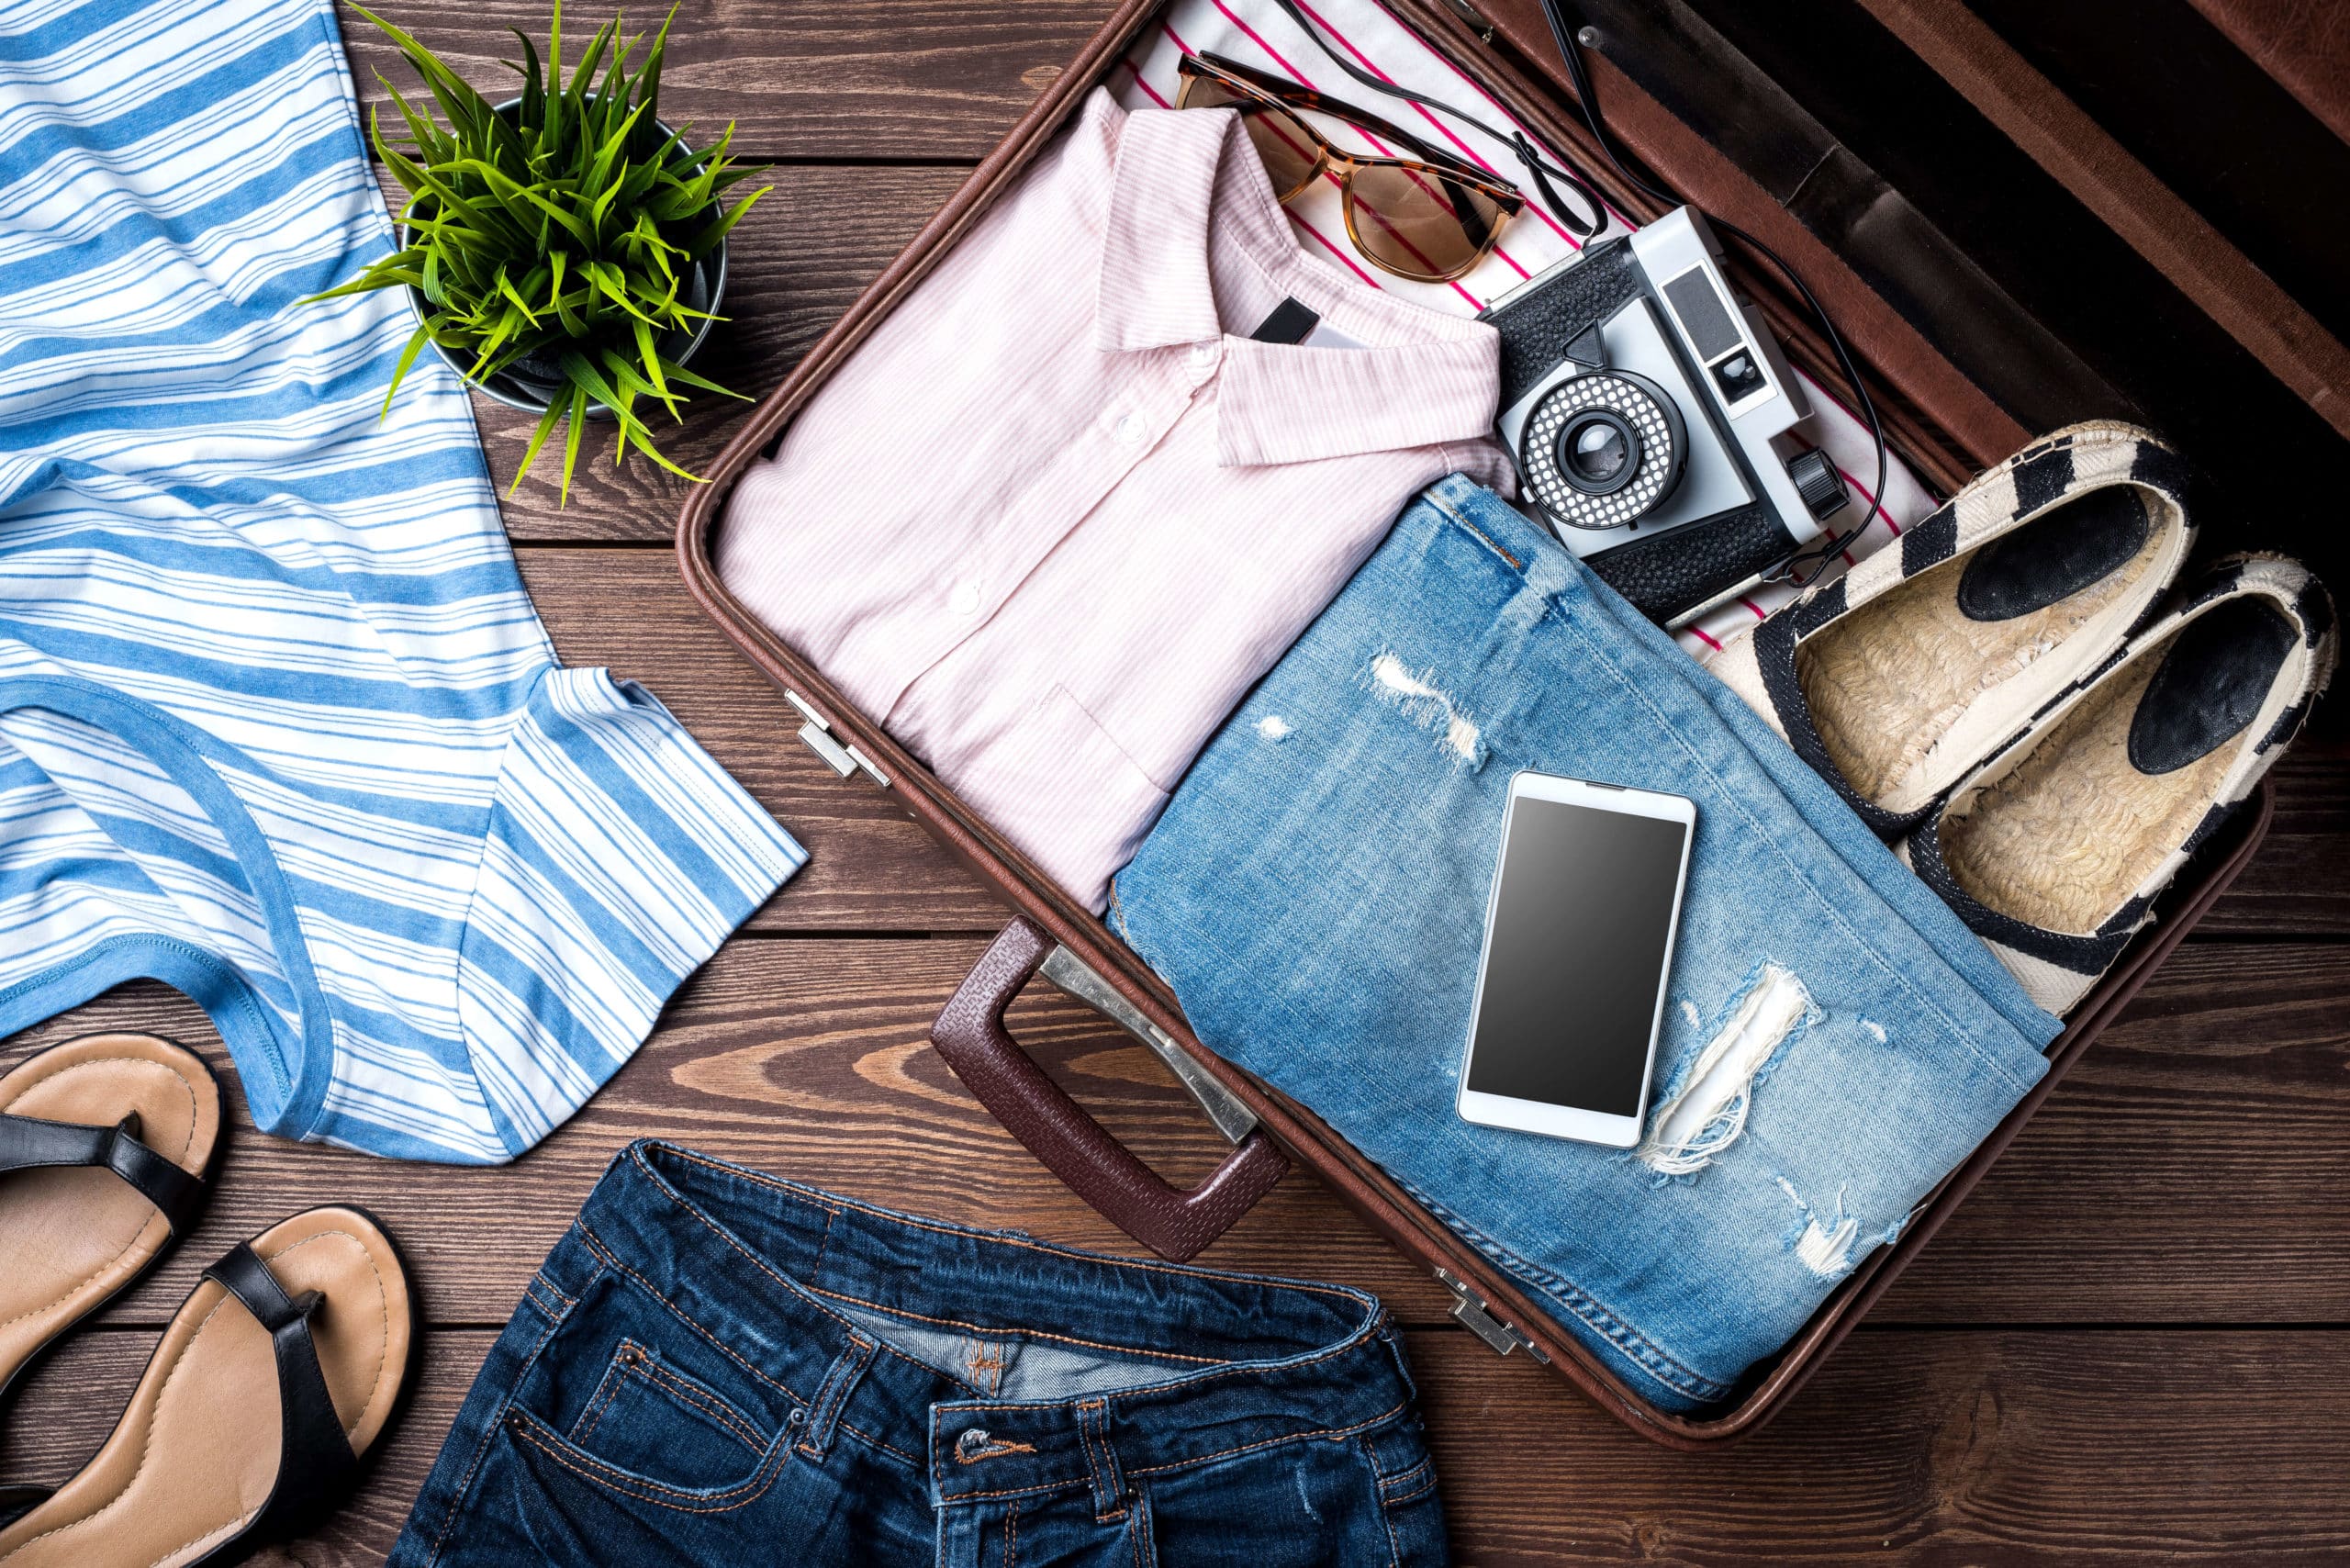 Travel Packing Tips That Comply with TSA Guidelines